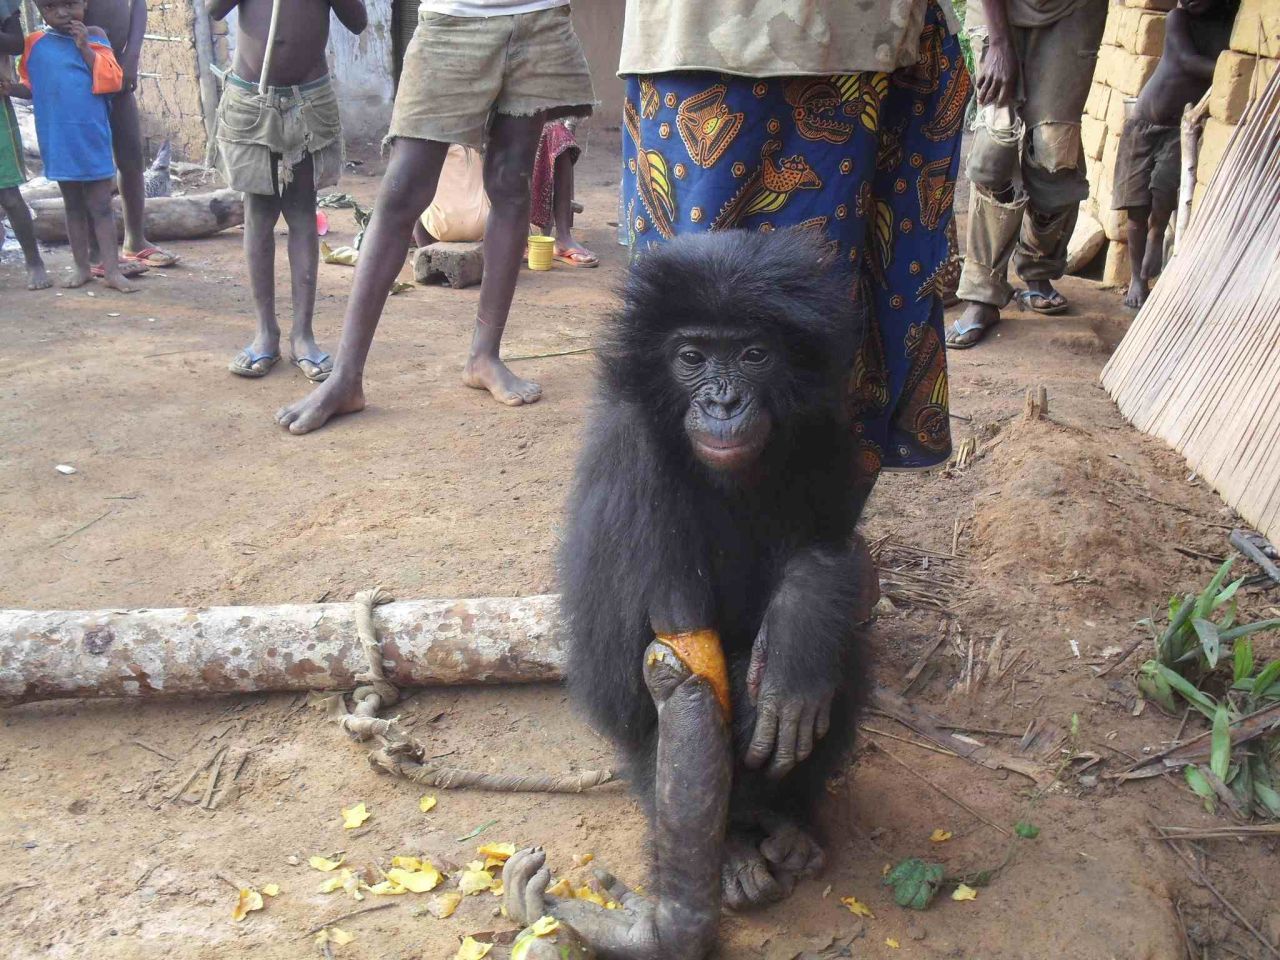 The little female, named Bolomba, has now arrived at Lola Ya Bonobo where she received treatment for her broken arm.